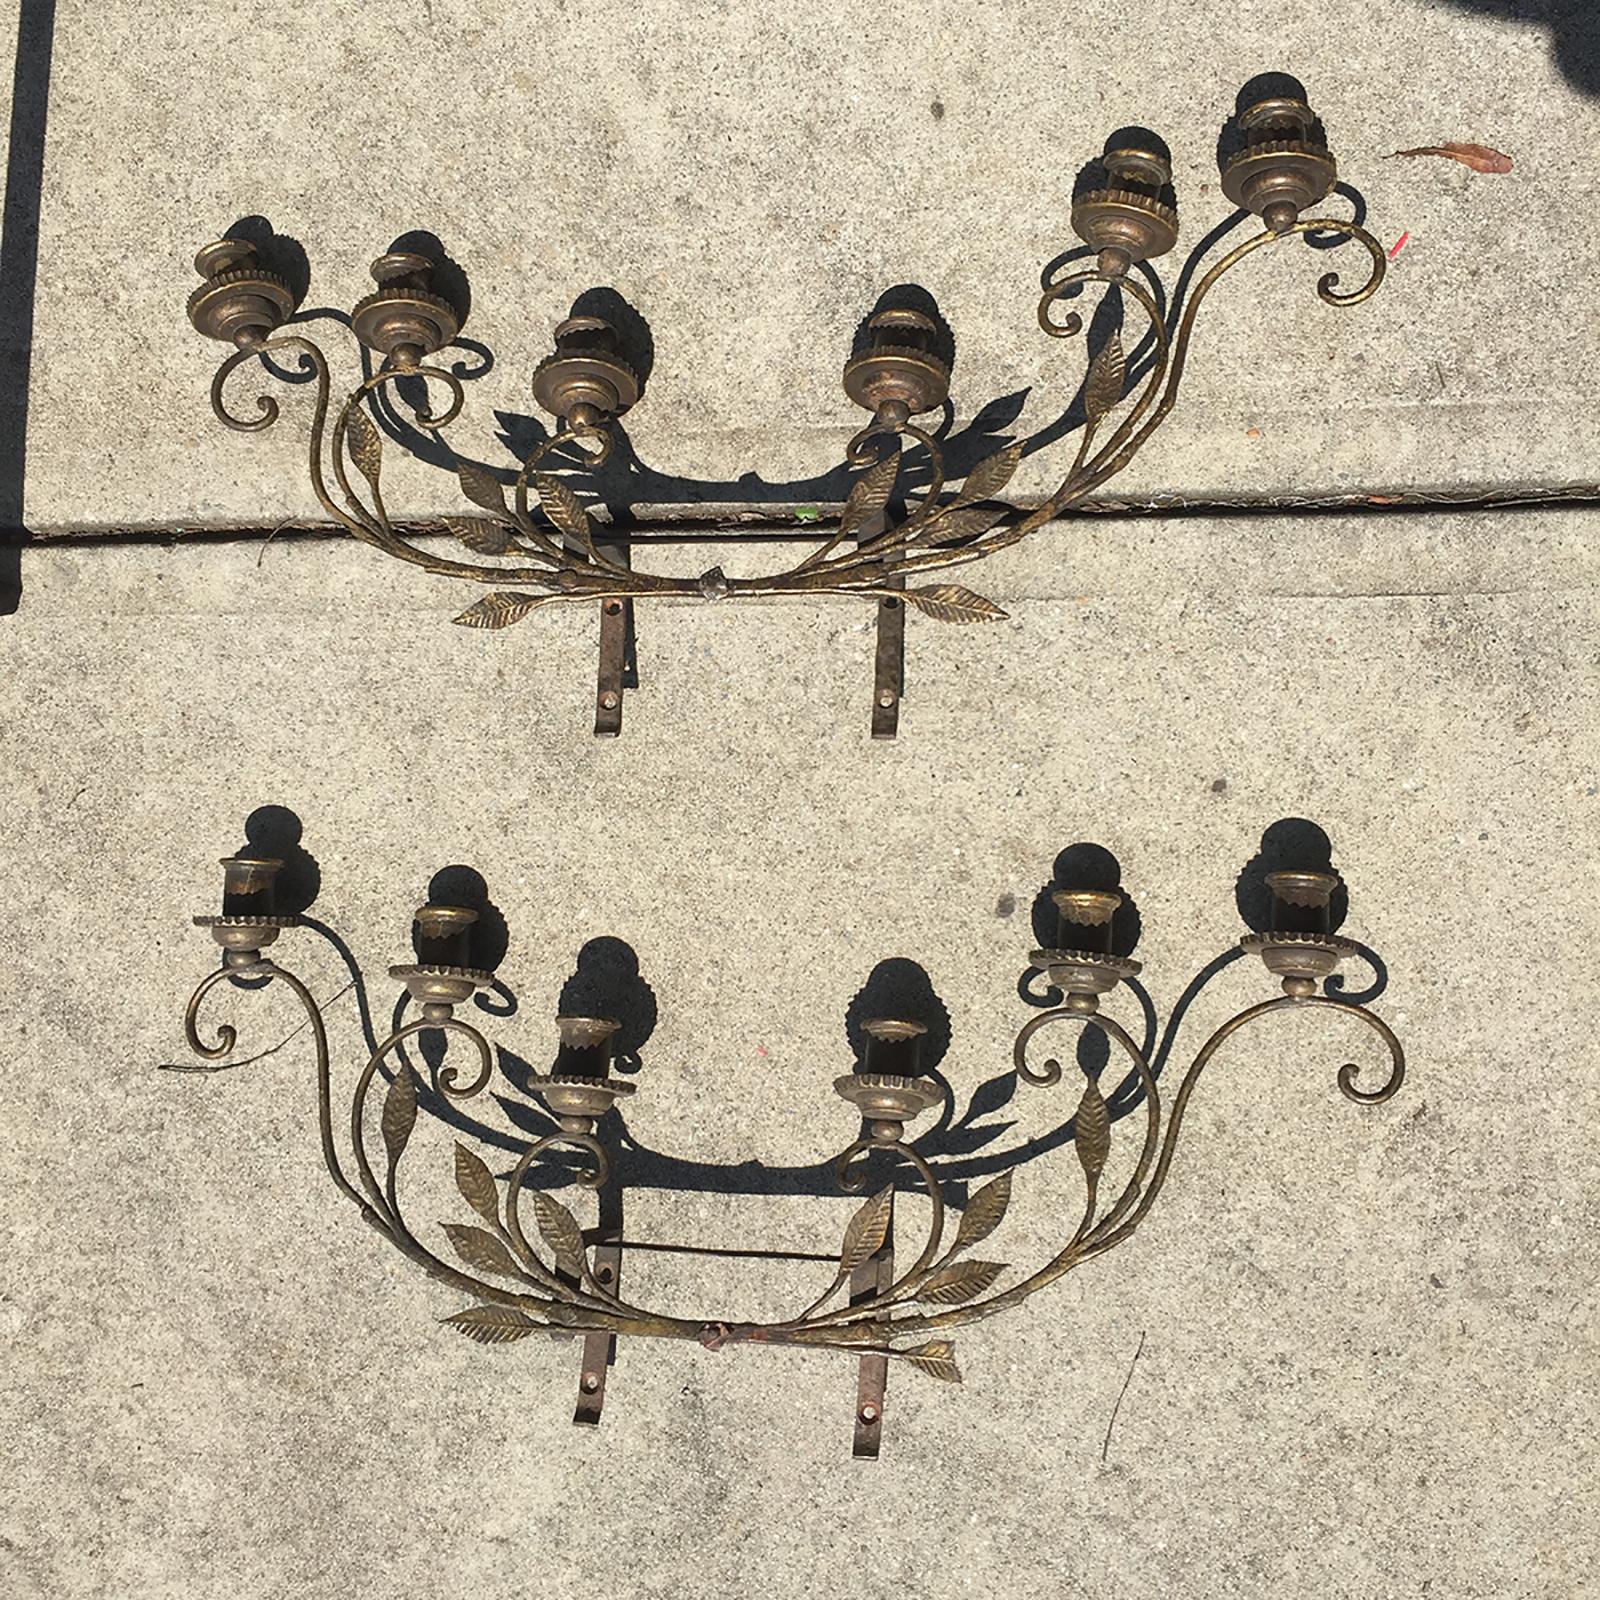 Pair of early 20th century Italian brass six-light sconces with tole and wood candle cups and Iron mounts
These are not wired - for decorative candles.